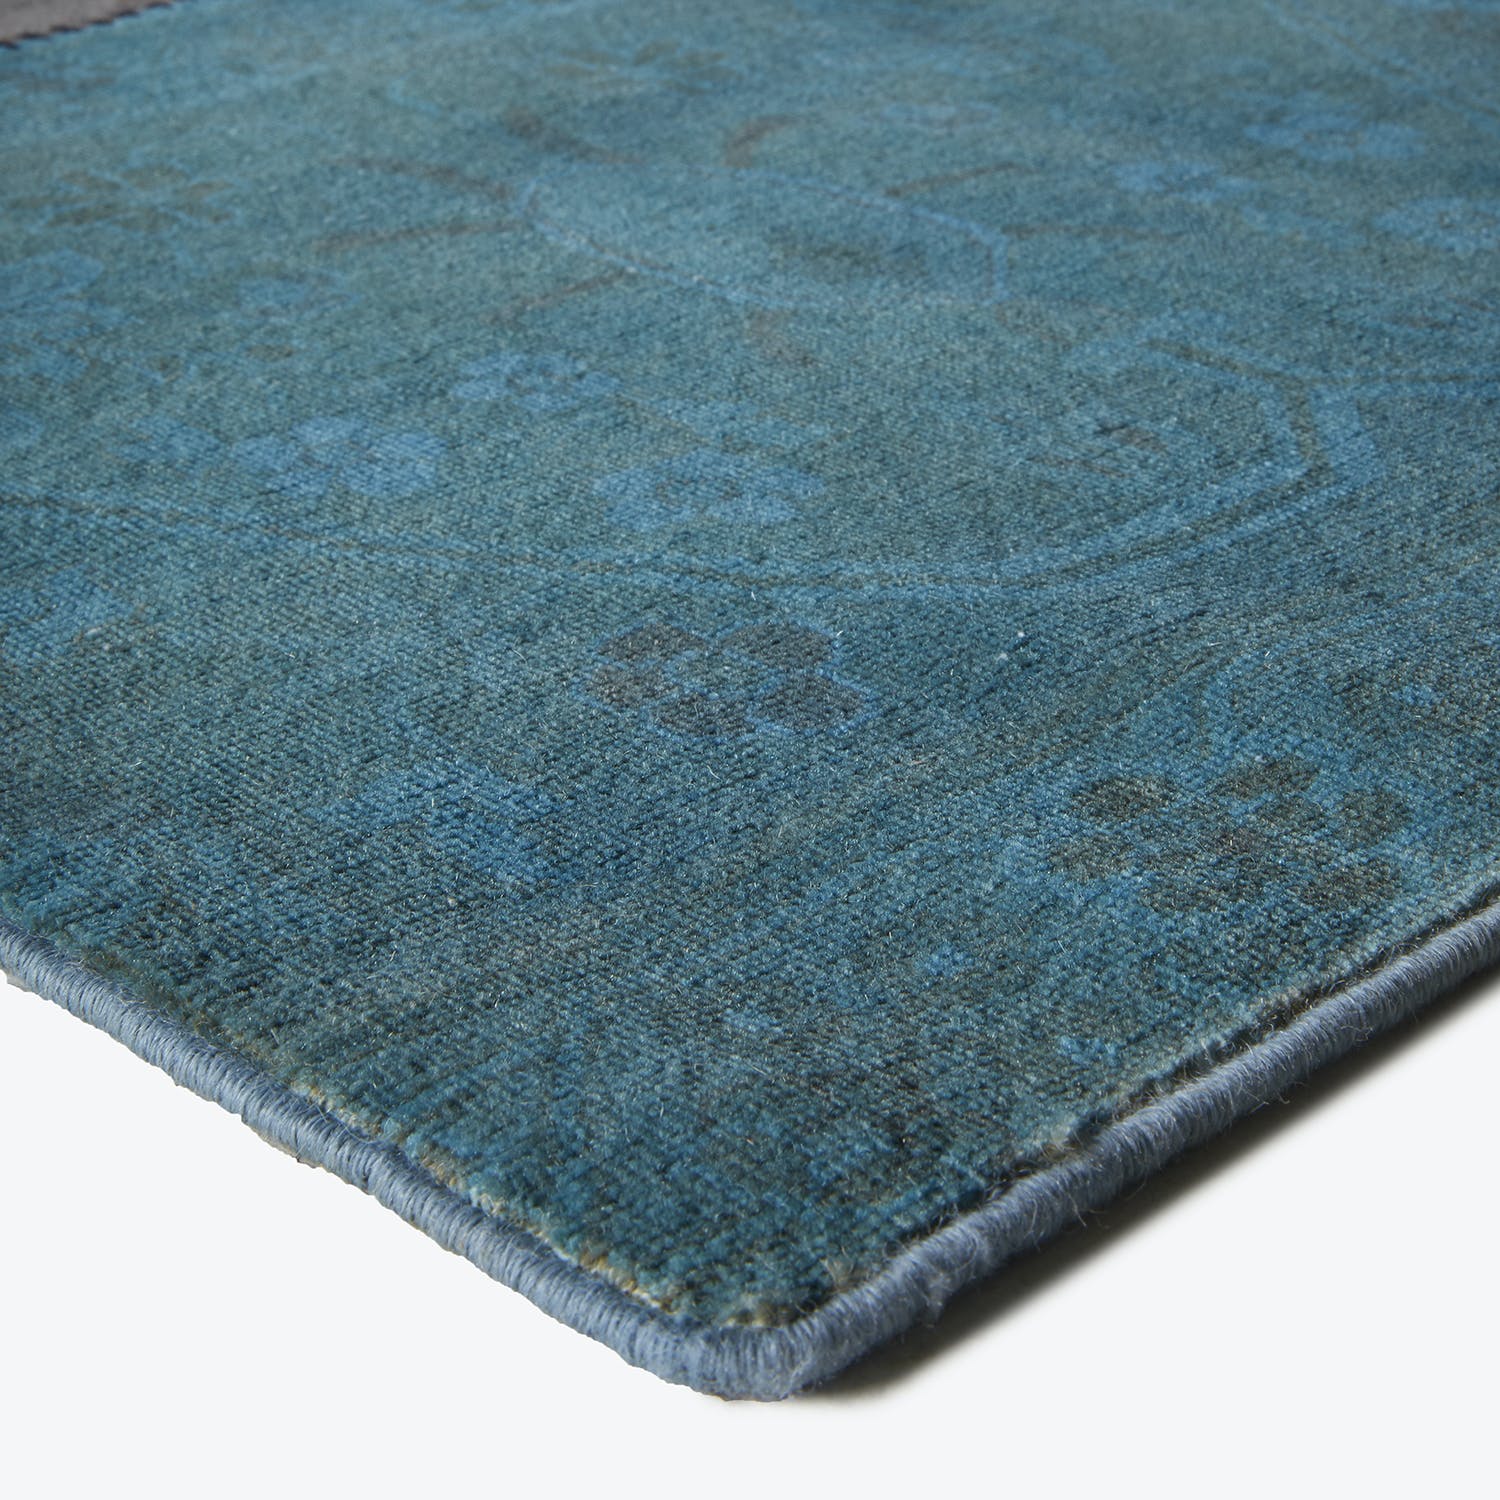 Close-up of a high-quality teal carpet with intricate patterns.